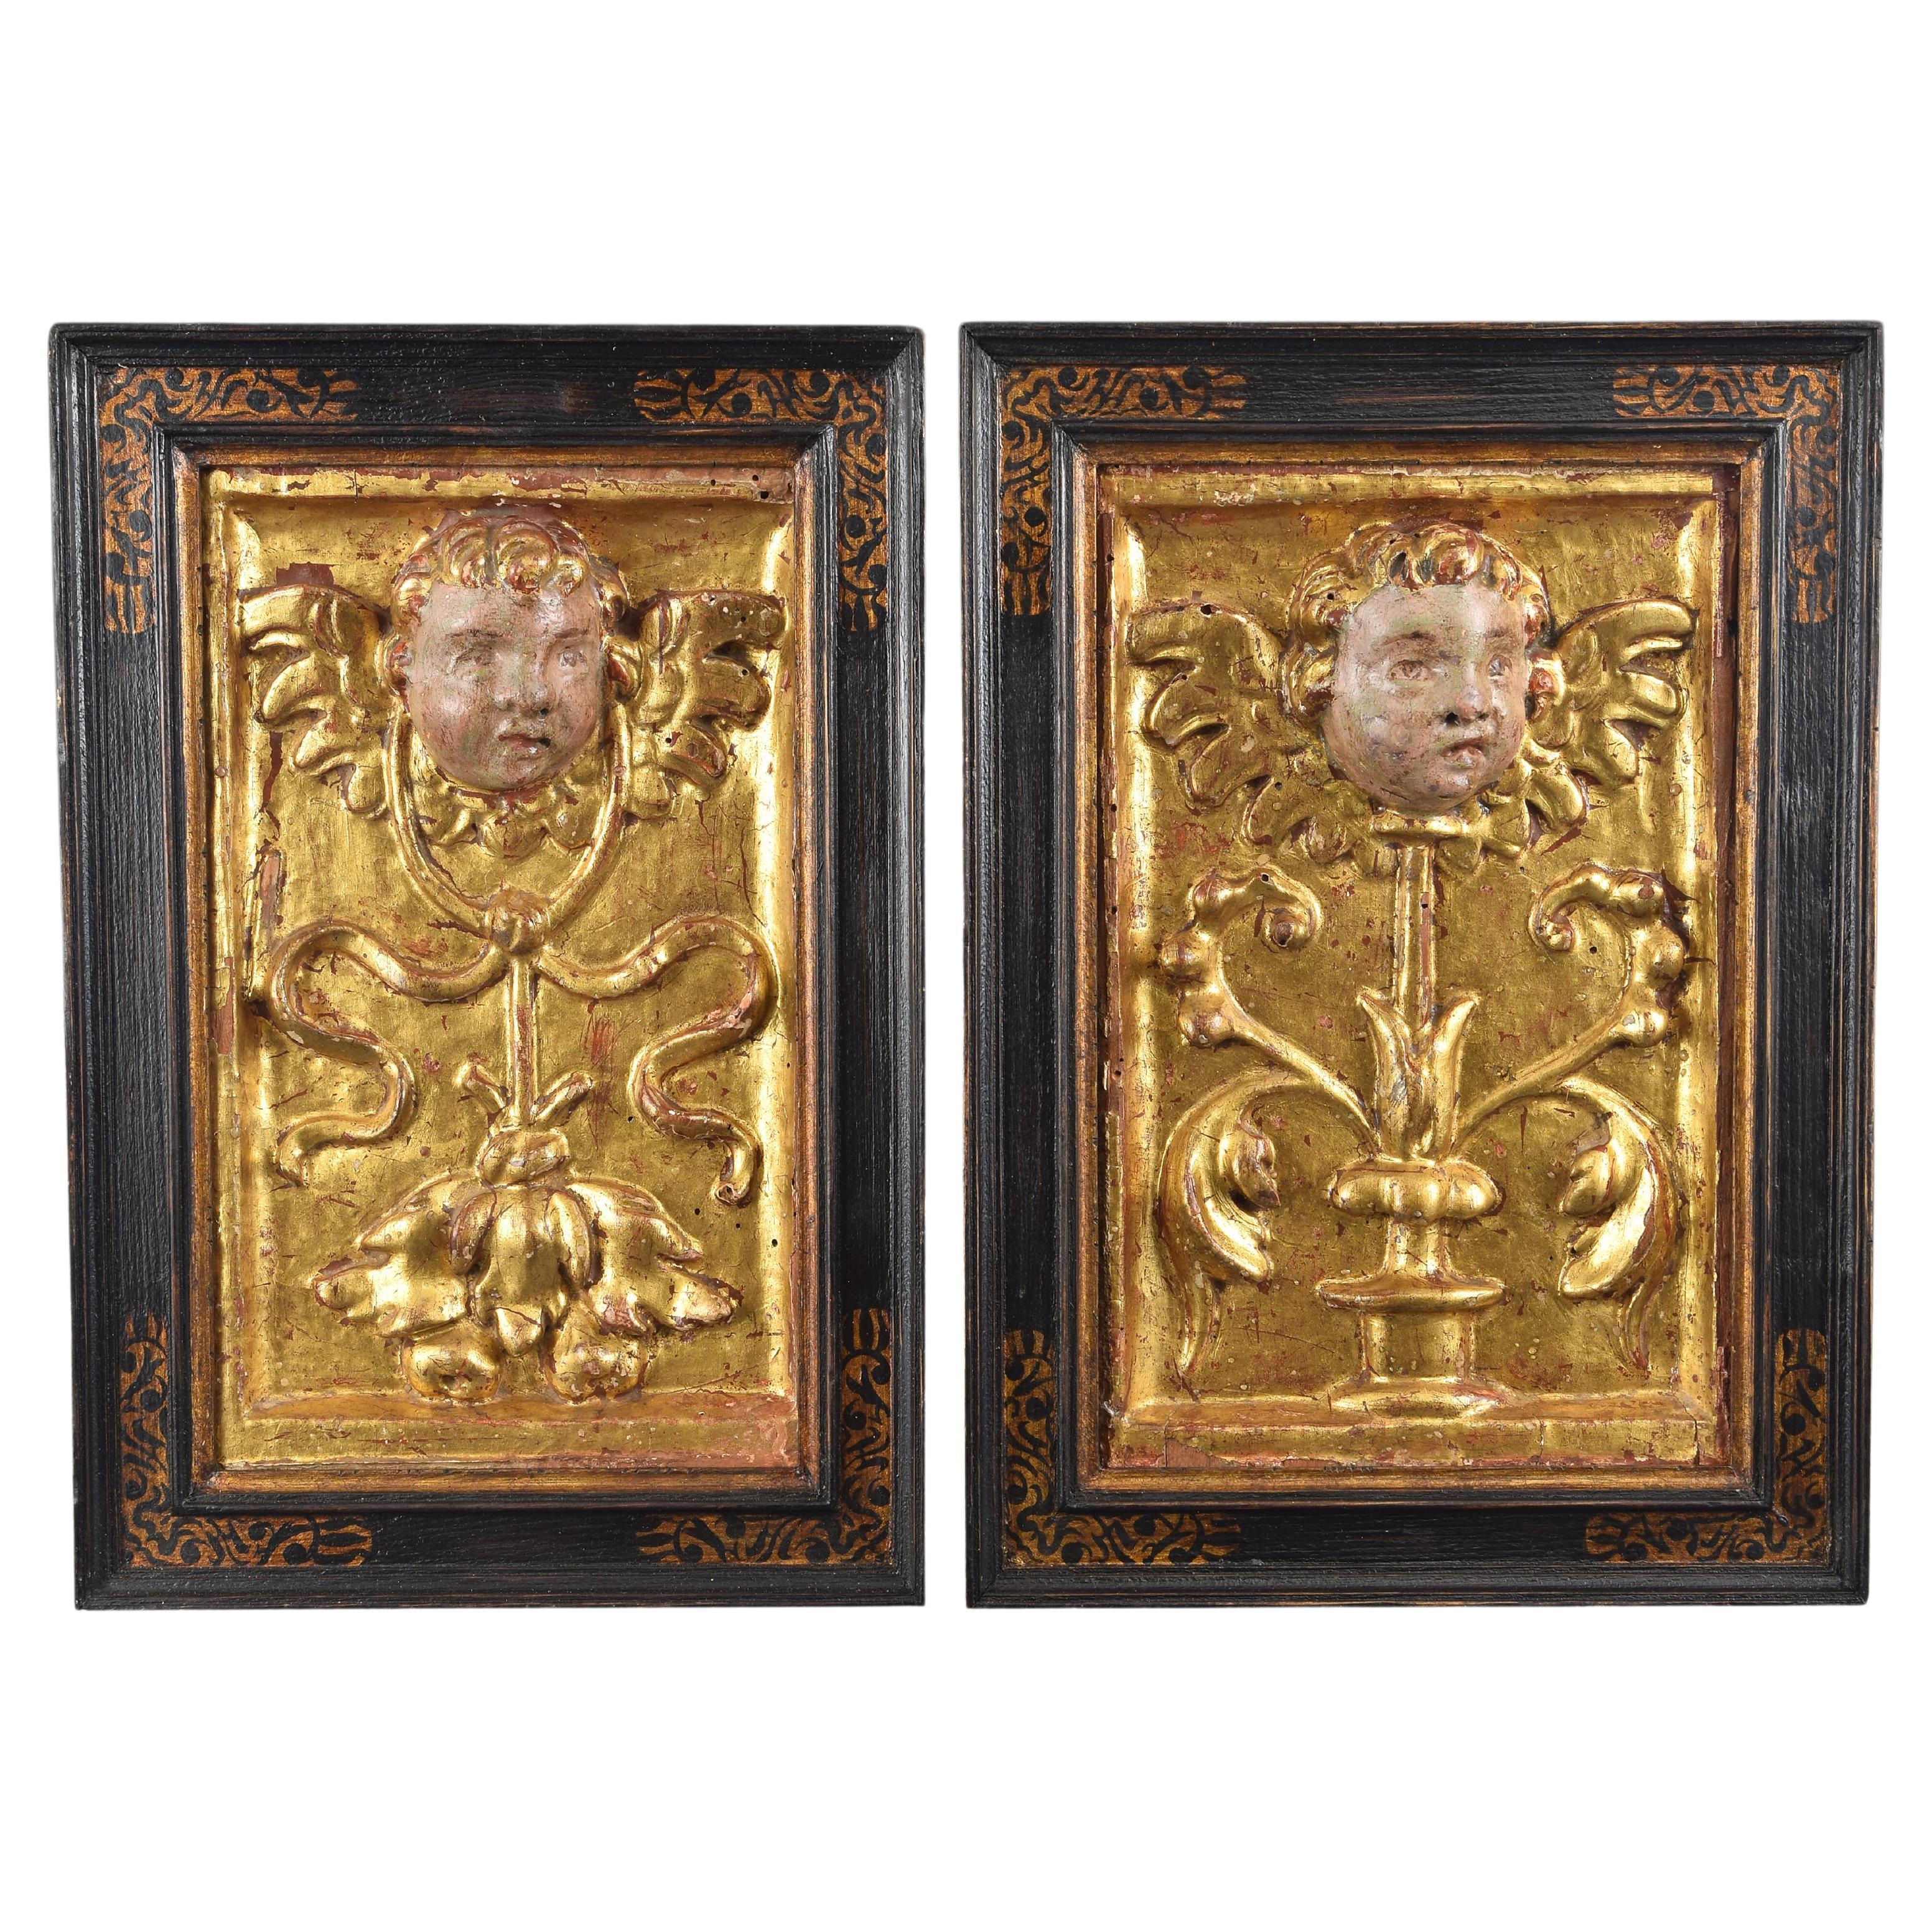 Pair of Reliefs, Grotesque or Candelieri, Wood, 16th Century